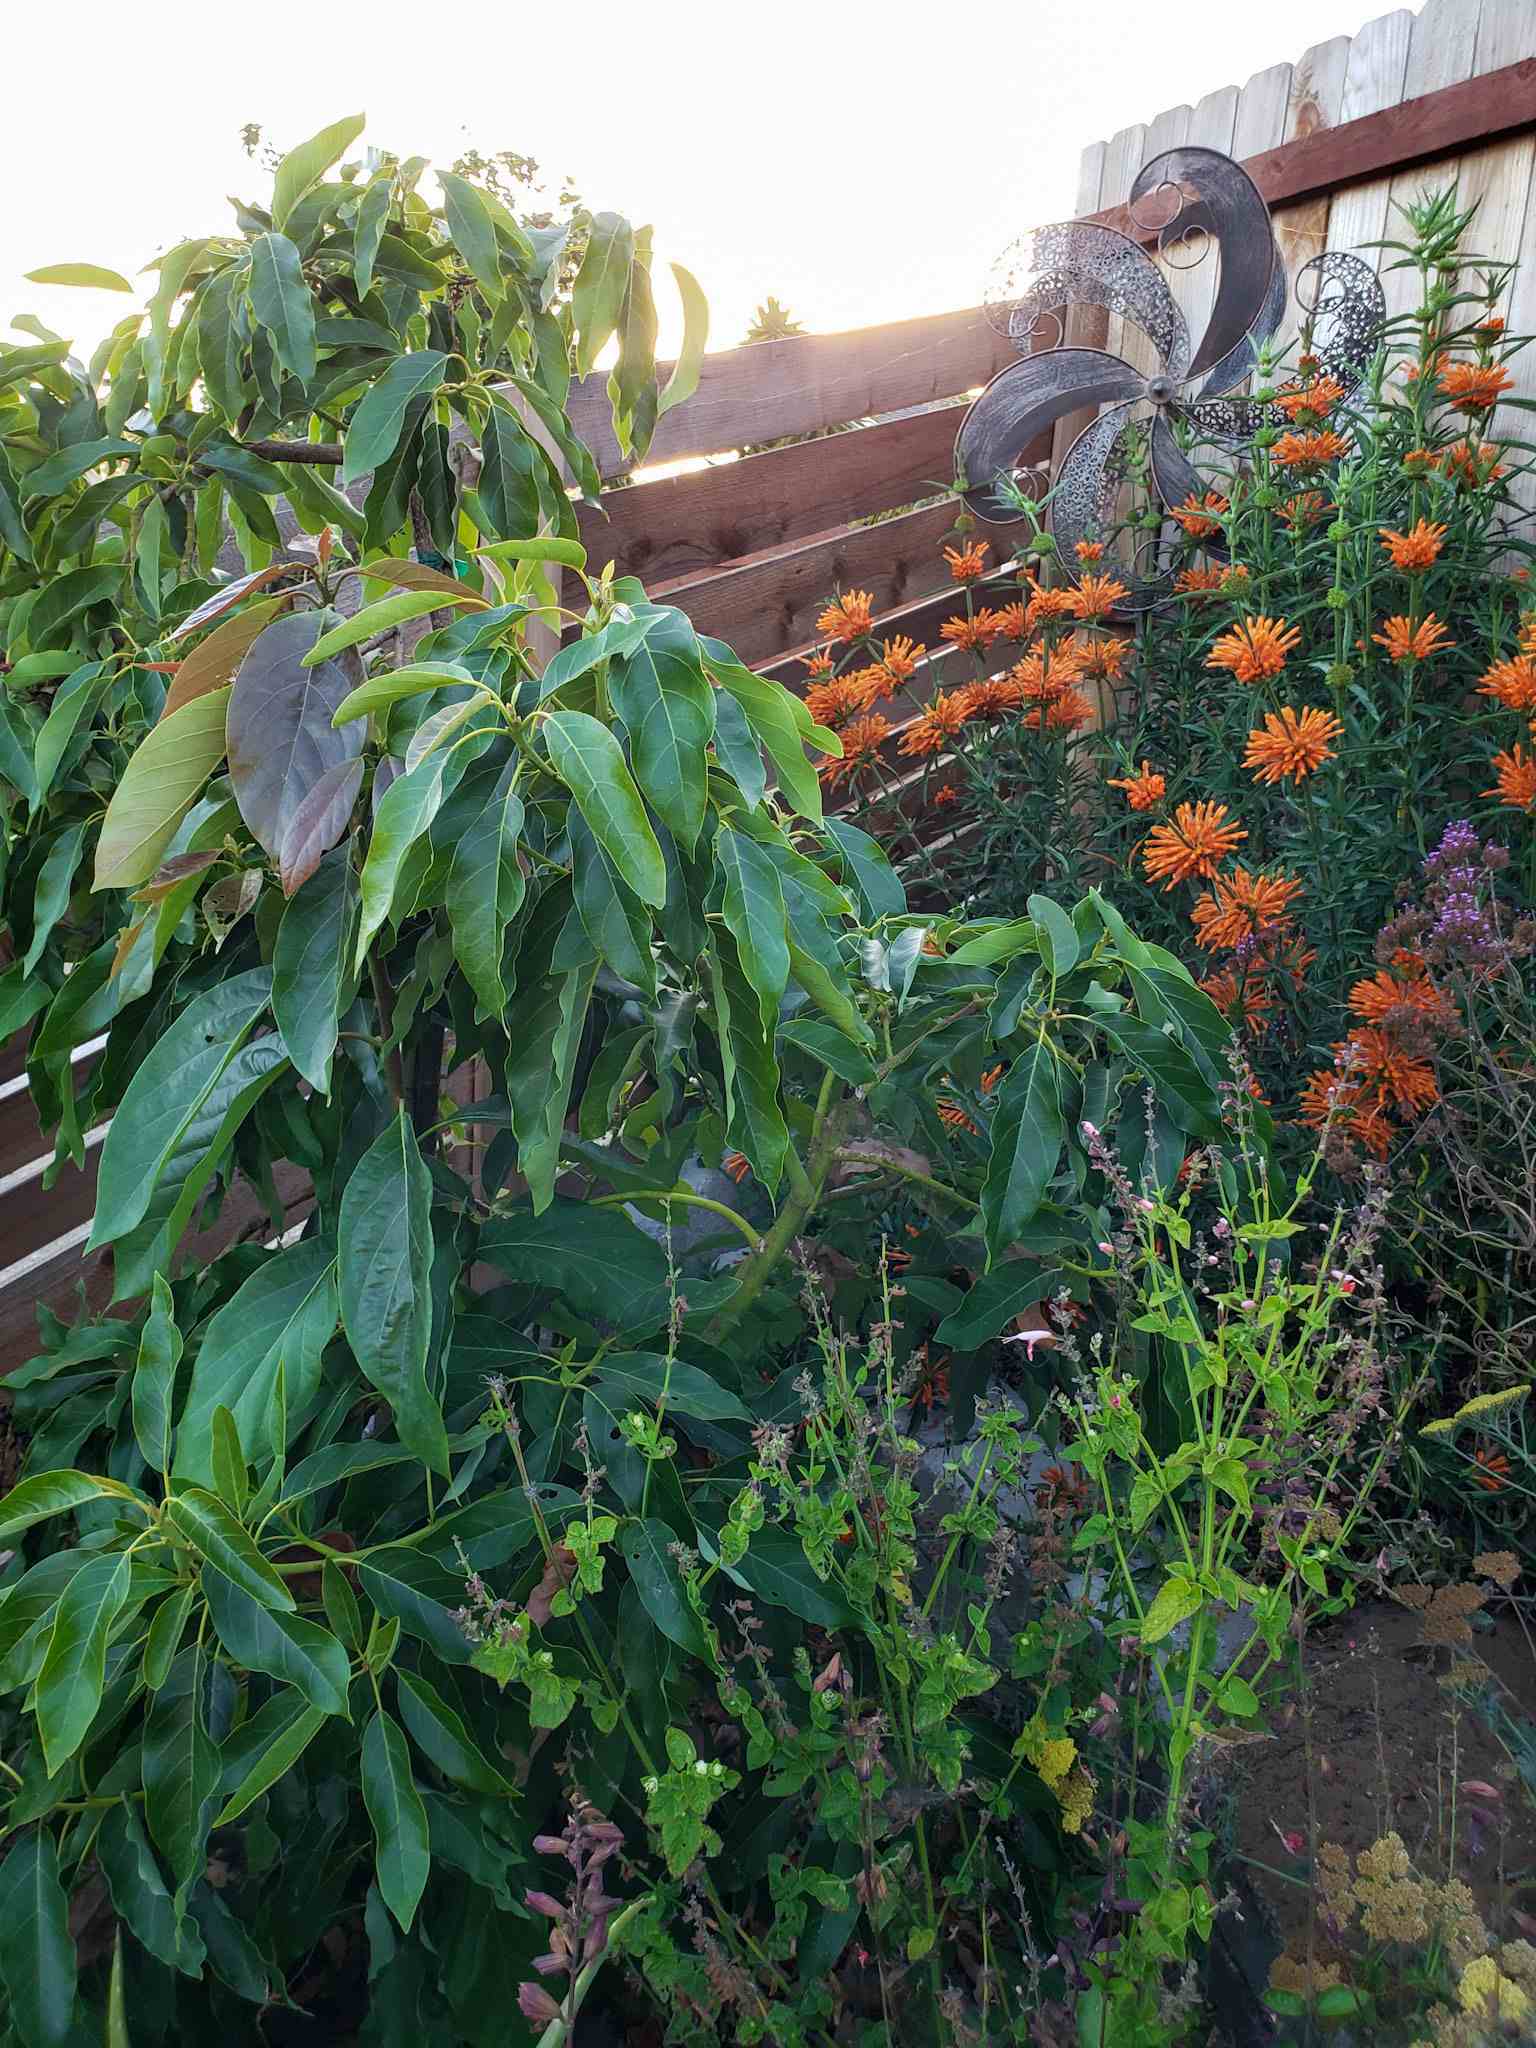 A small avocado tree planted amongst a terraced part of the yard. There are a number of blooming plants around the tree with a variety of pink, purple, yellow and orange flowers.